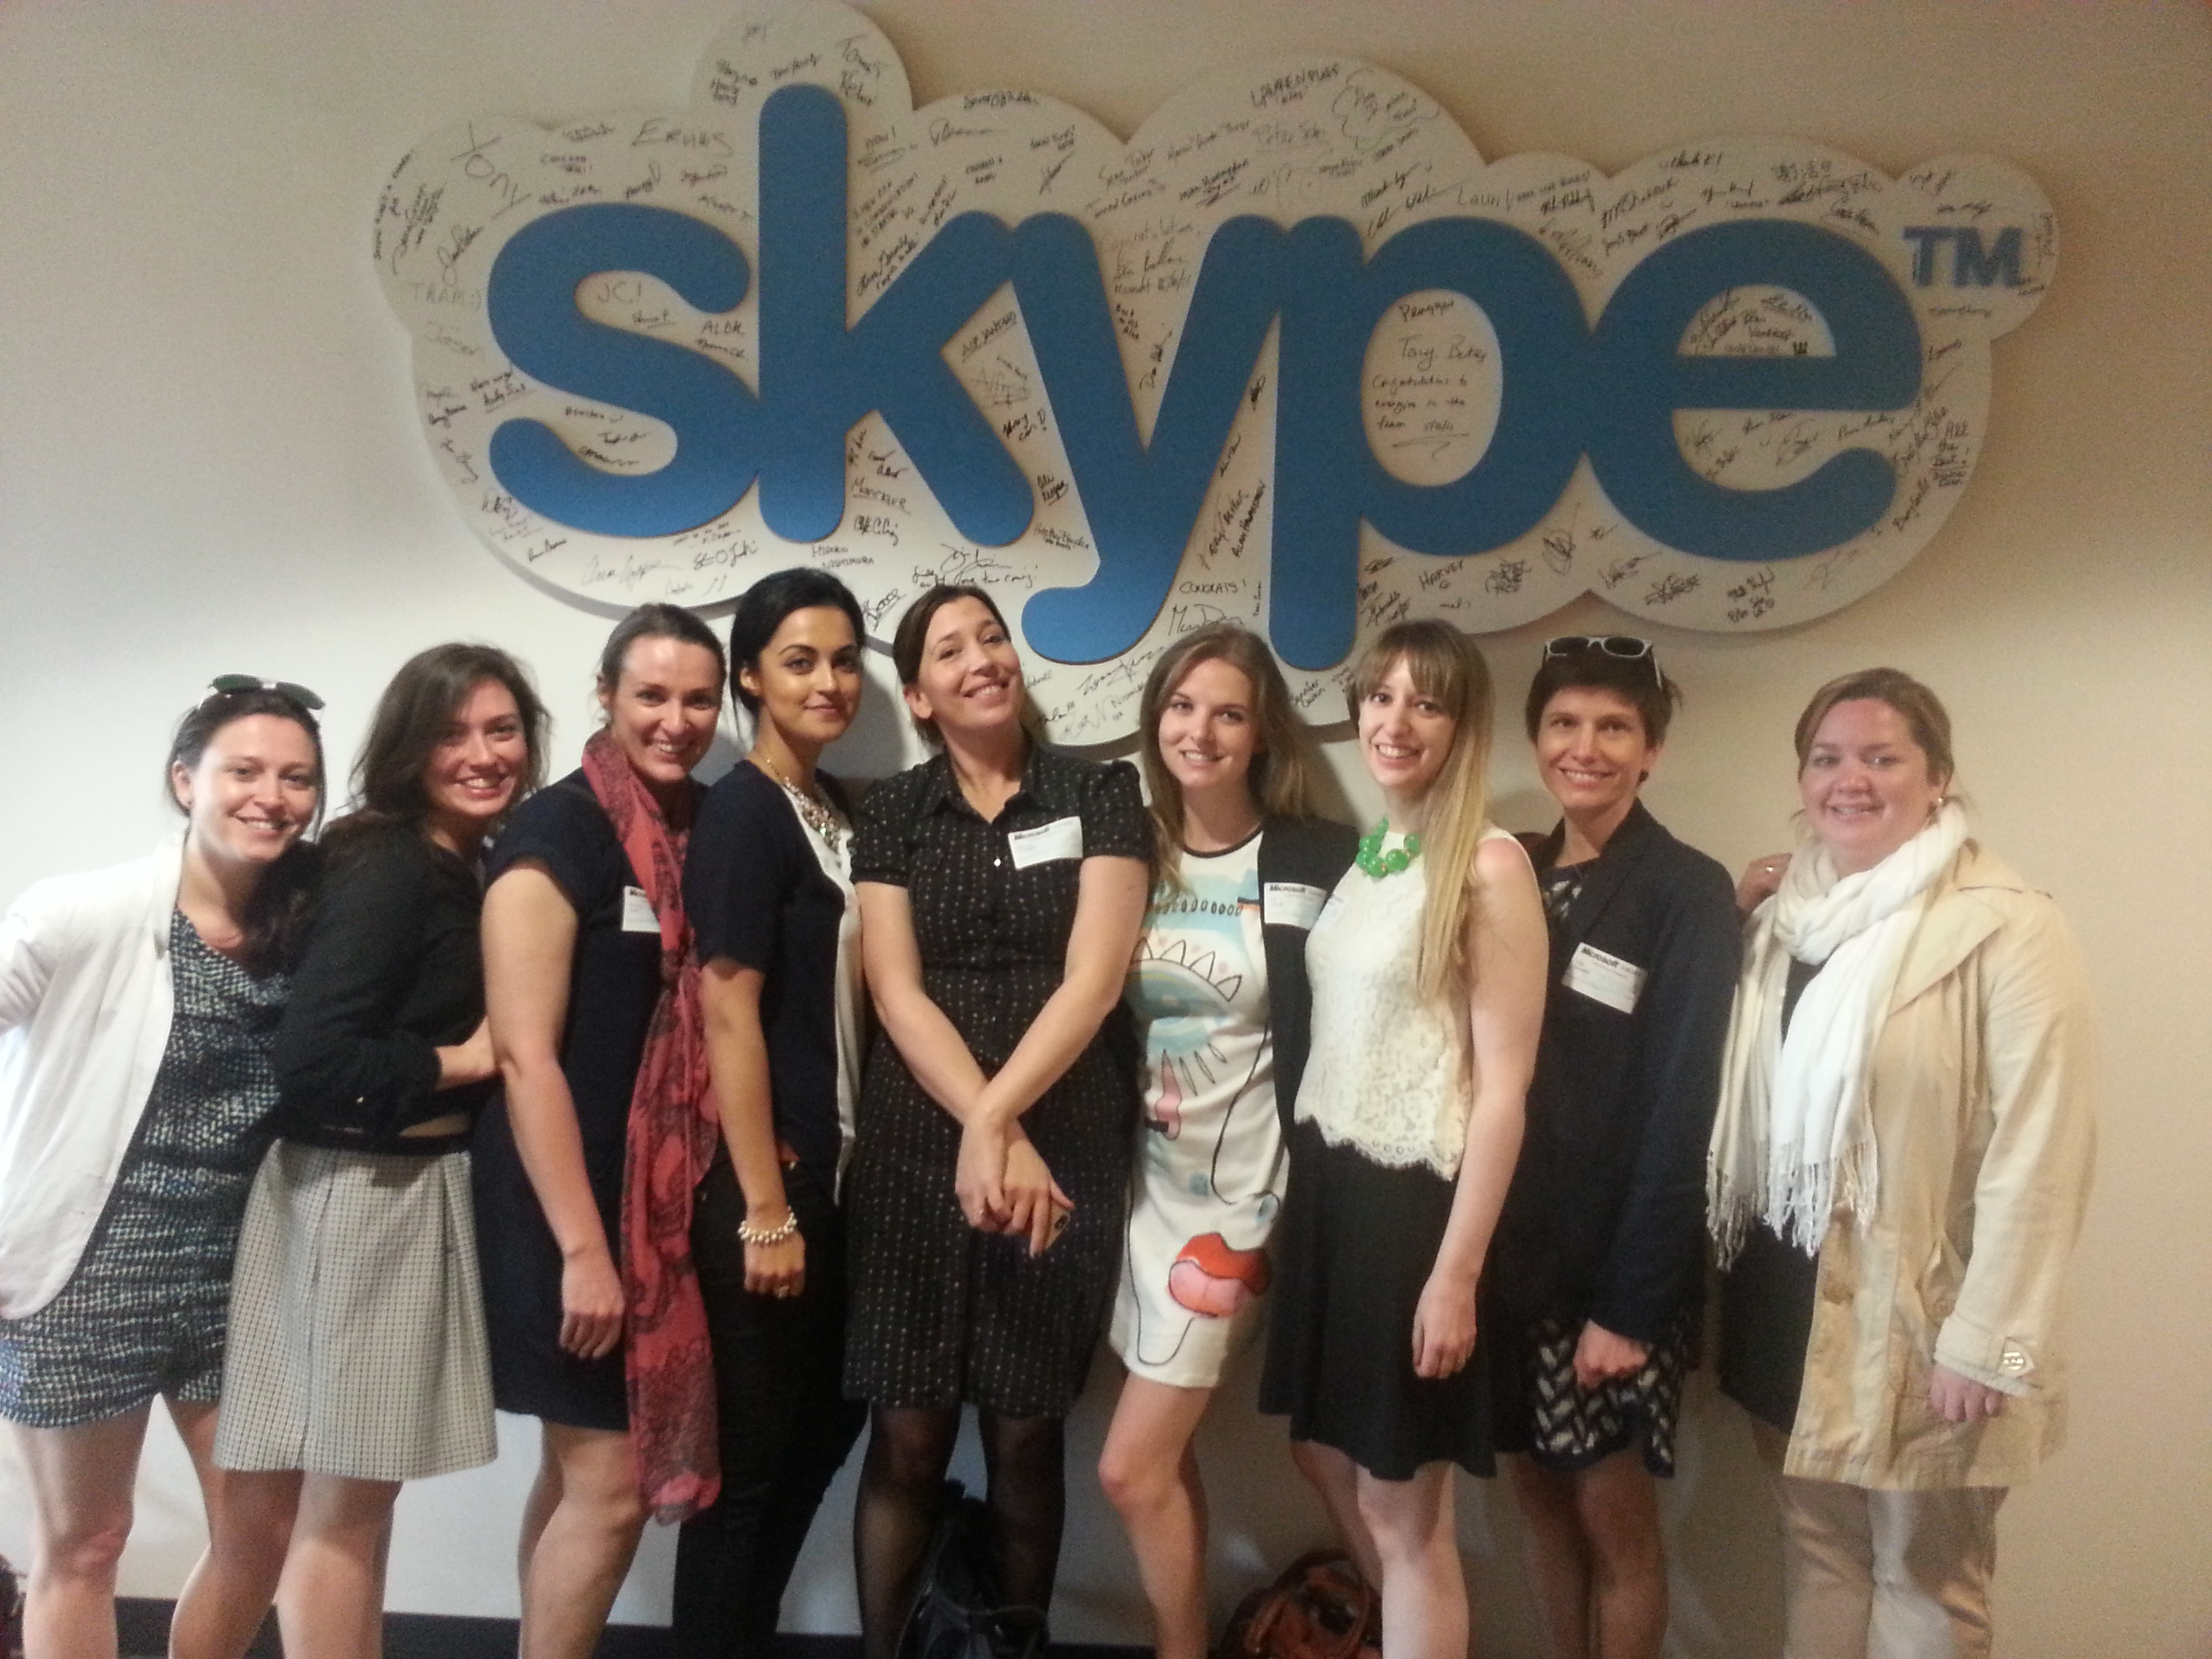 Special edition delegates at Skype